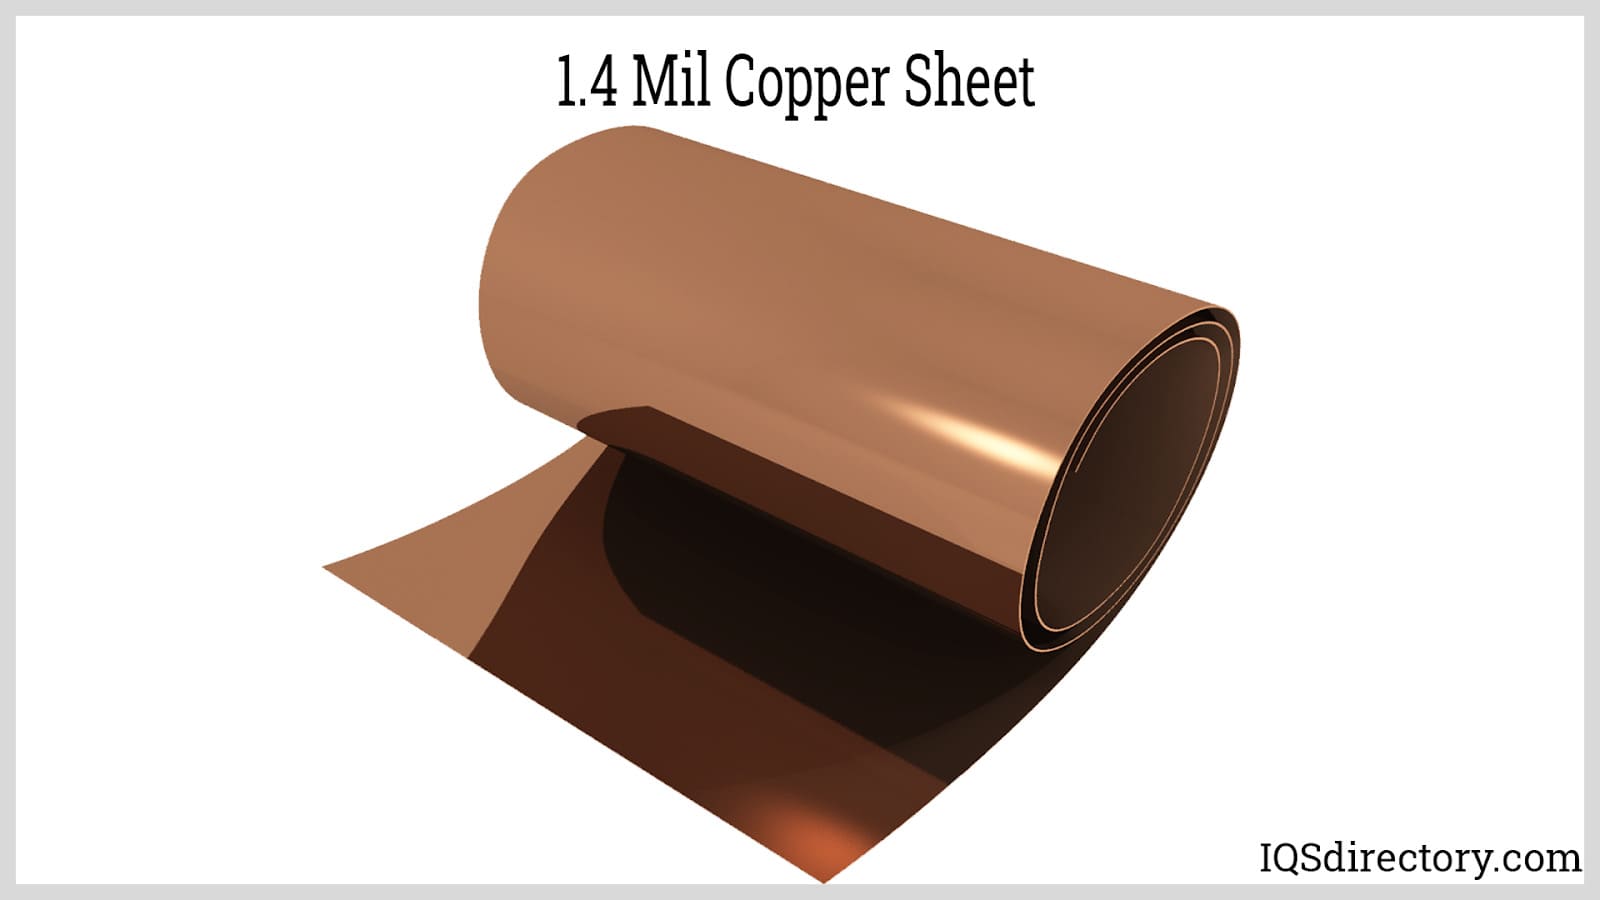 Copper Sheets: Types of Sheets, Types of Alloys, Applications and